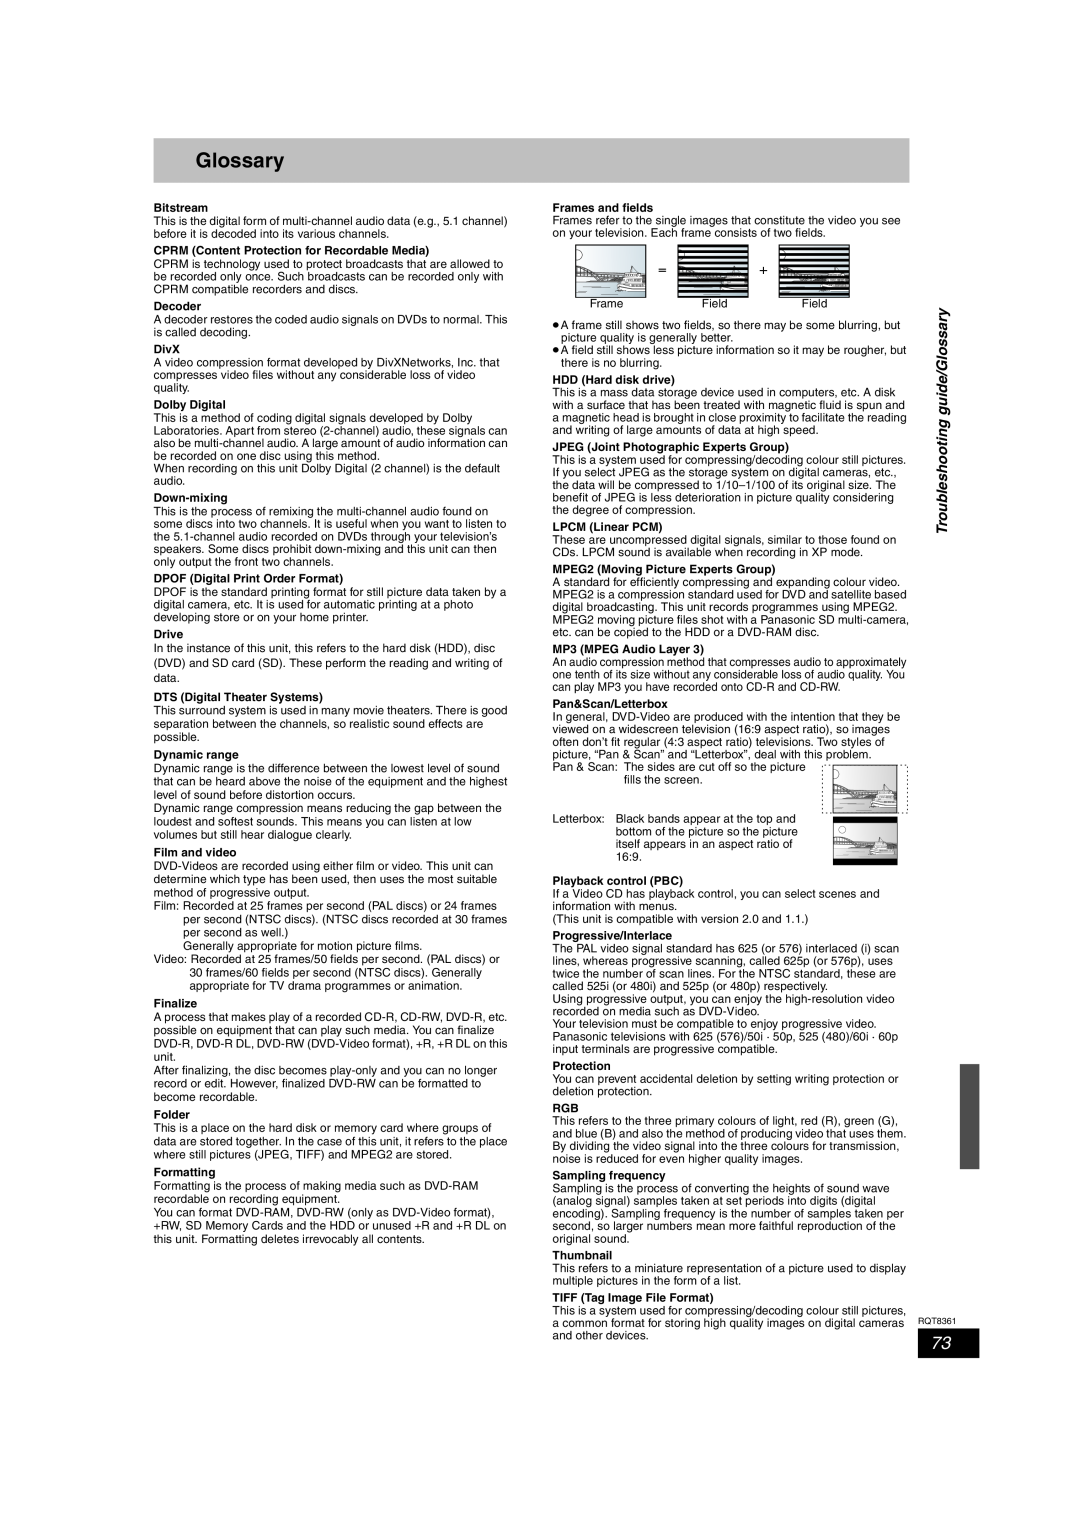 Philips DMR-EH55 operating instructions Troubleshooting guide/Glossary 